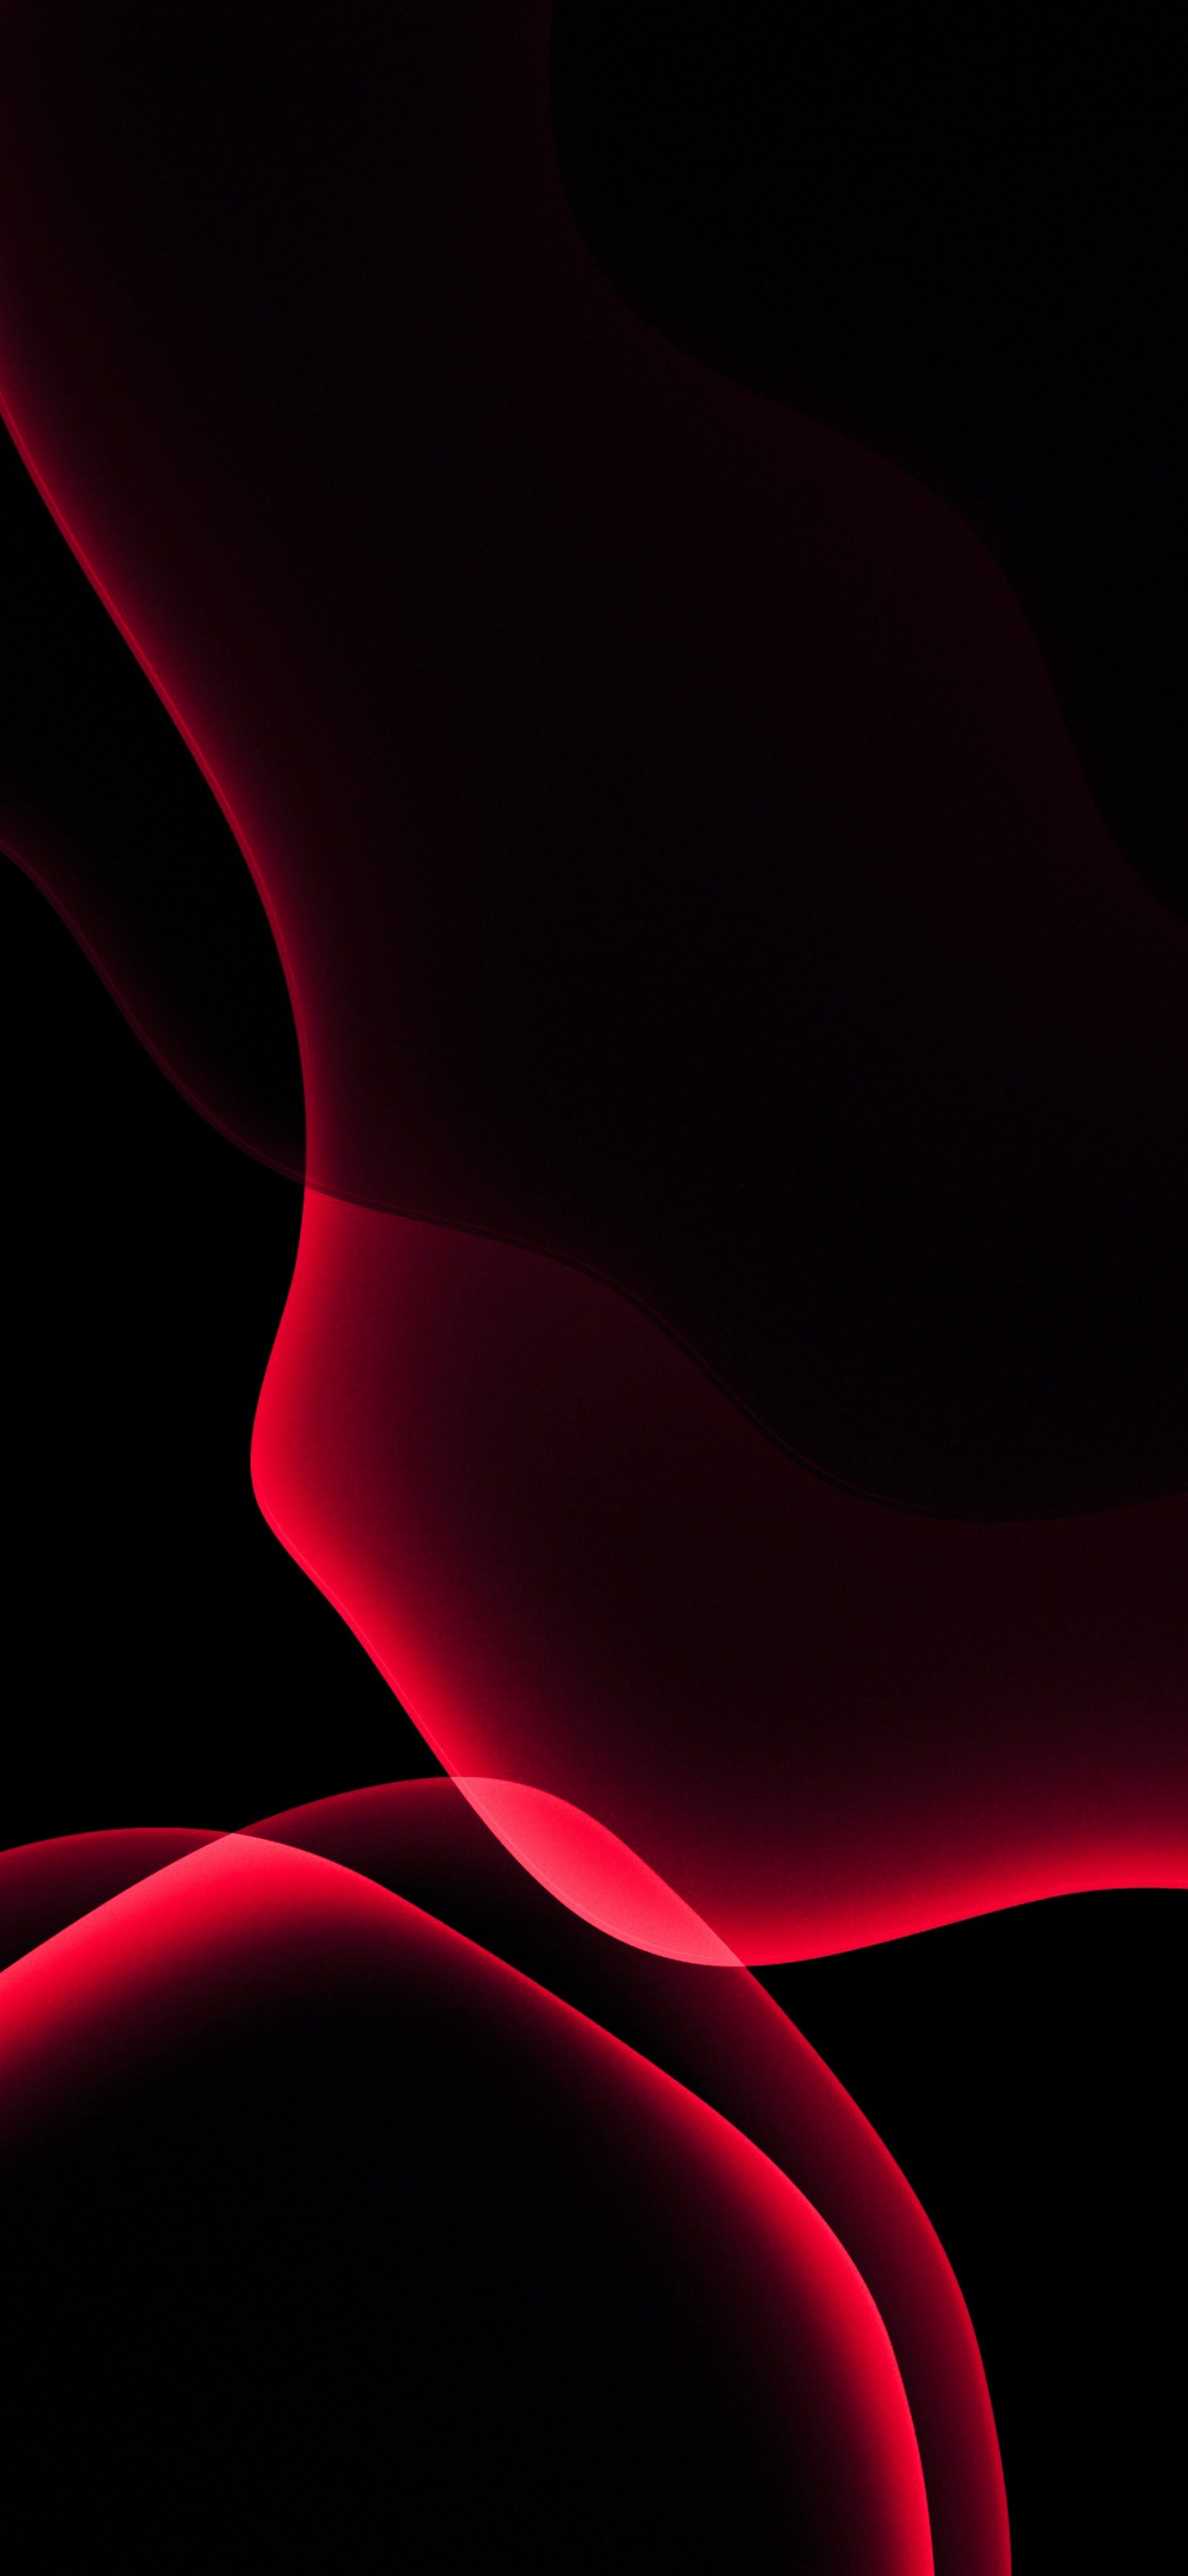 4K Red Wallpaper HDAmazoninAppstore for Android